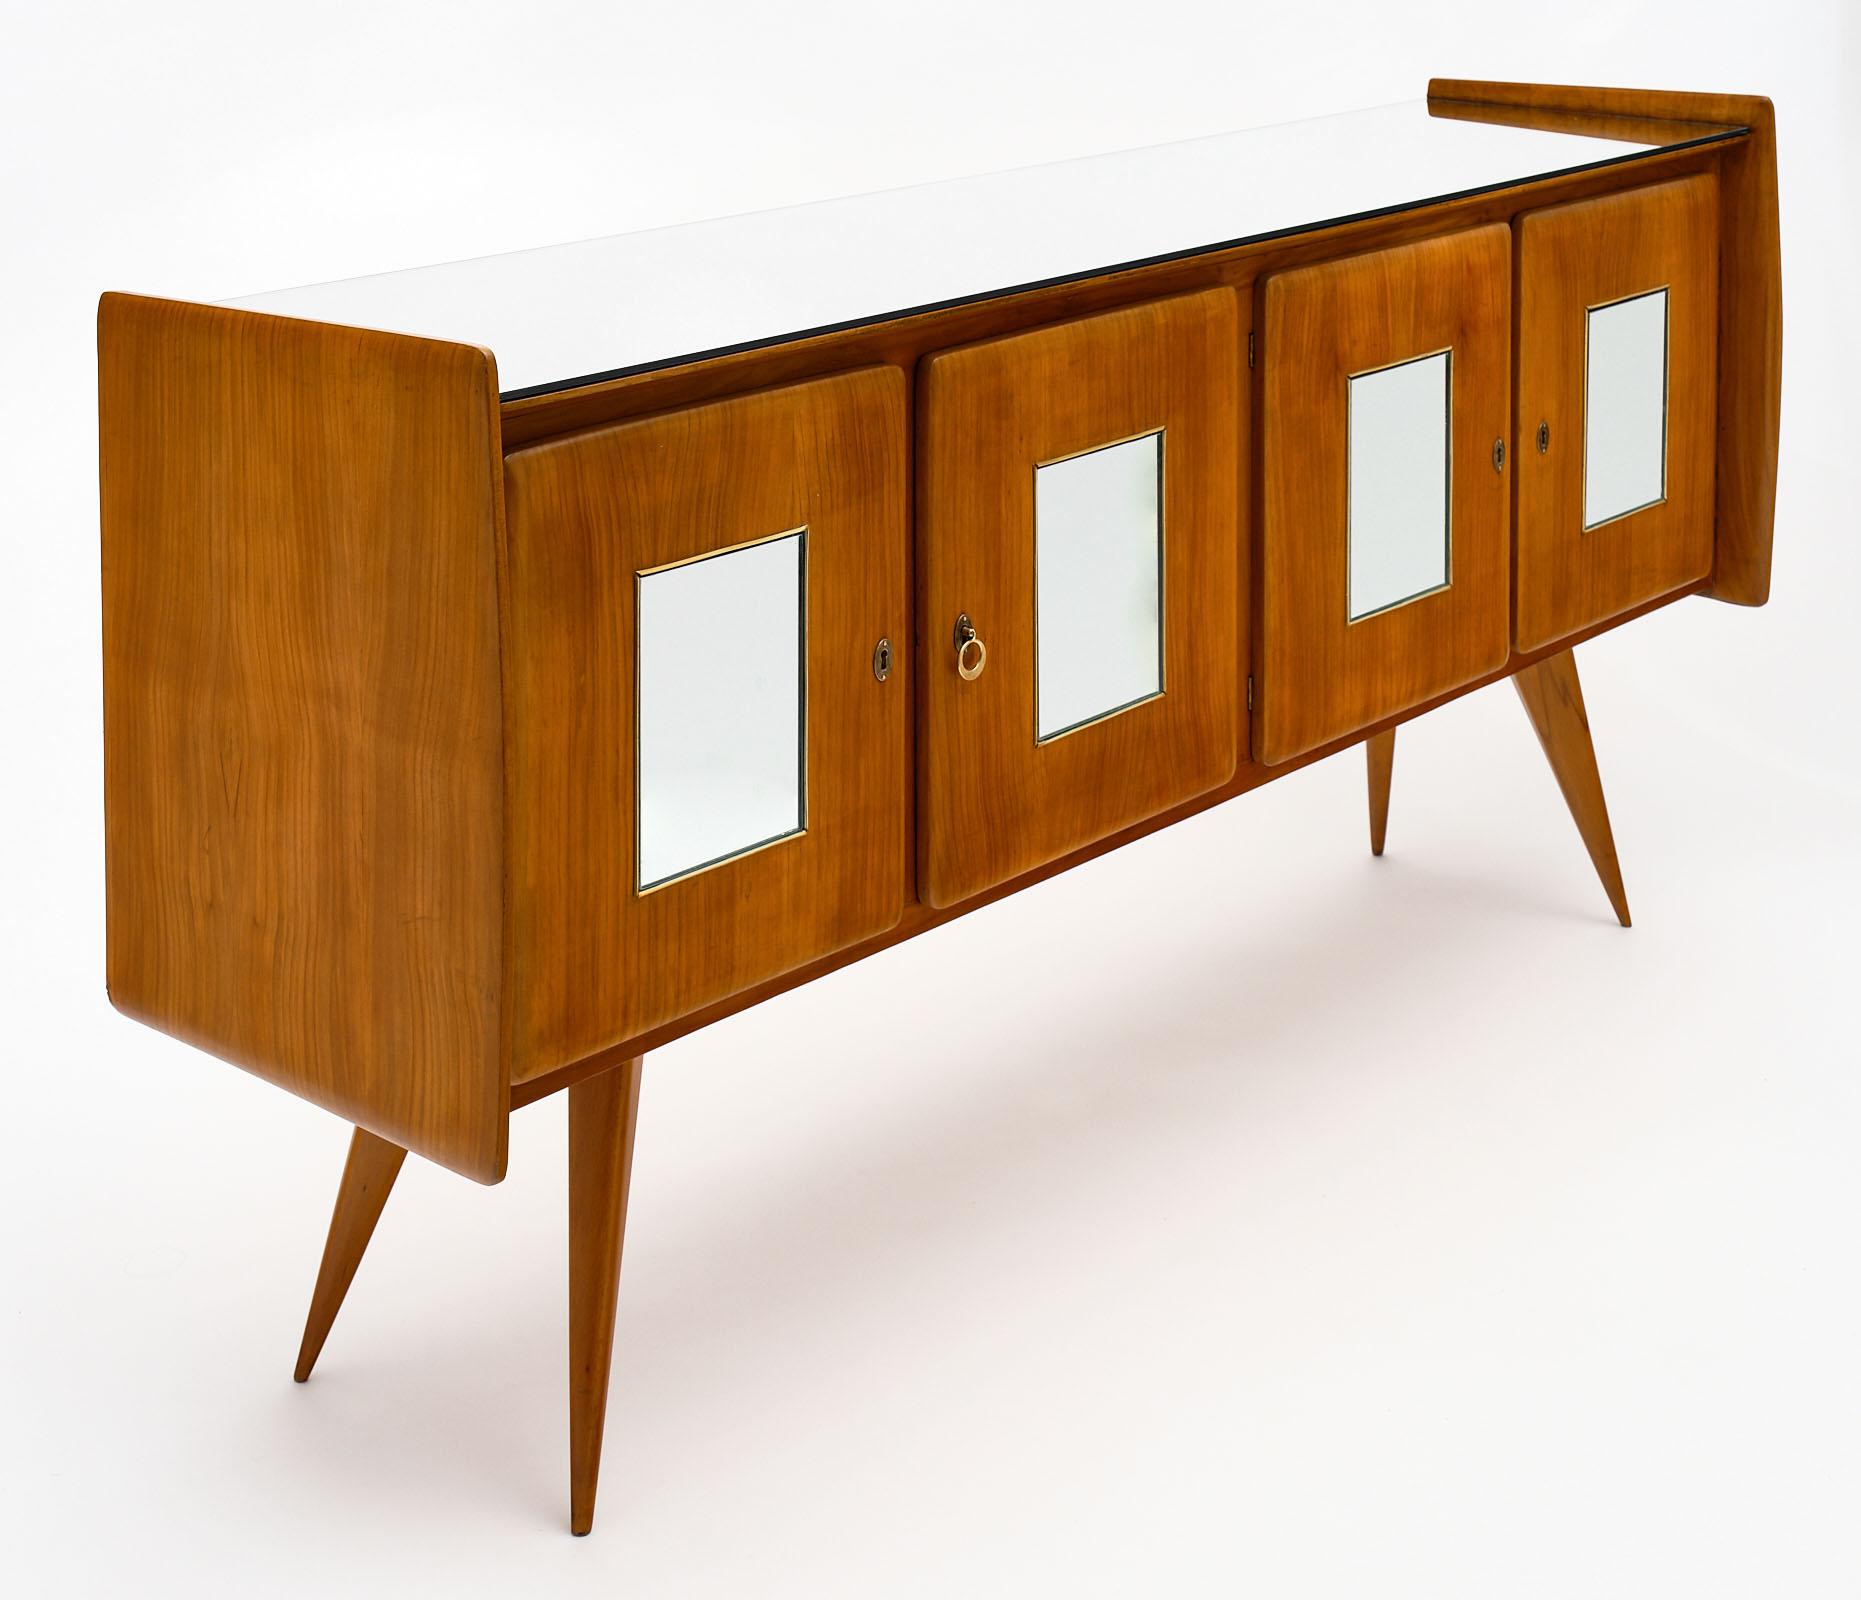 Midcentury Italian mirrored buffet made of solid cherrywood in the style of Paolo Buffa. We love the mirrored top and mirrored center panels on all four doors. The tapered; flared legs add midcentury lines to this superb piece.